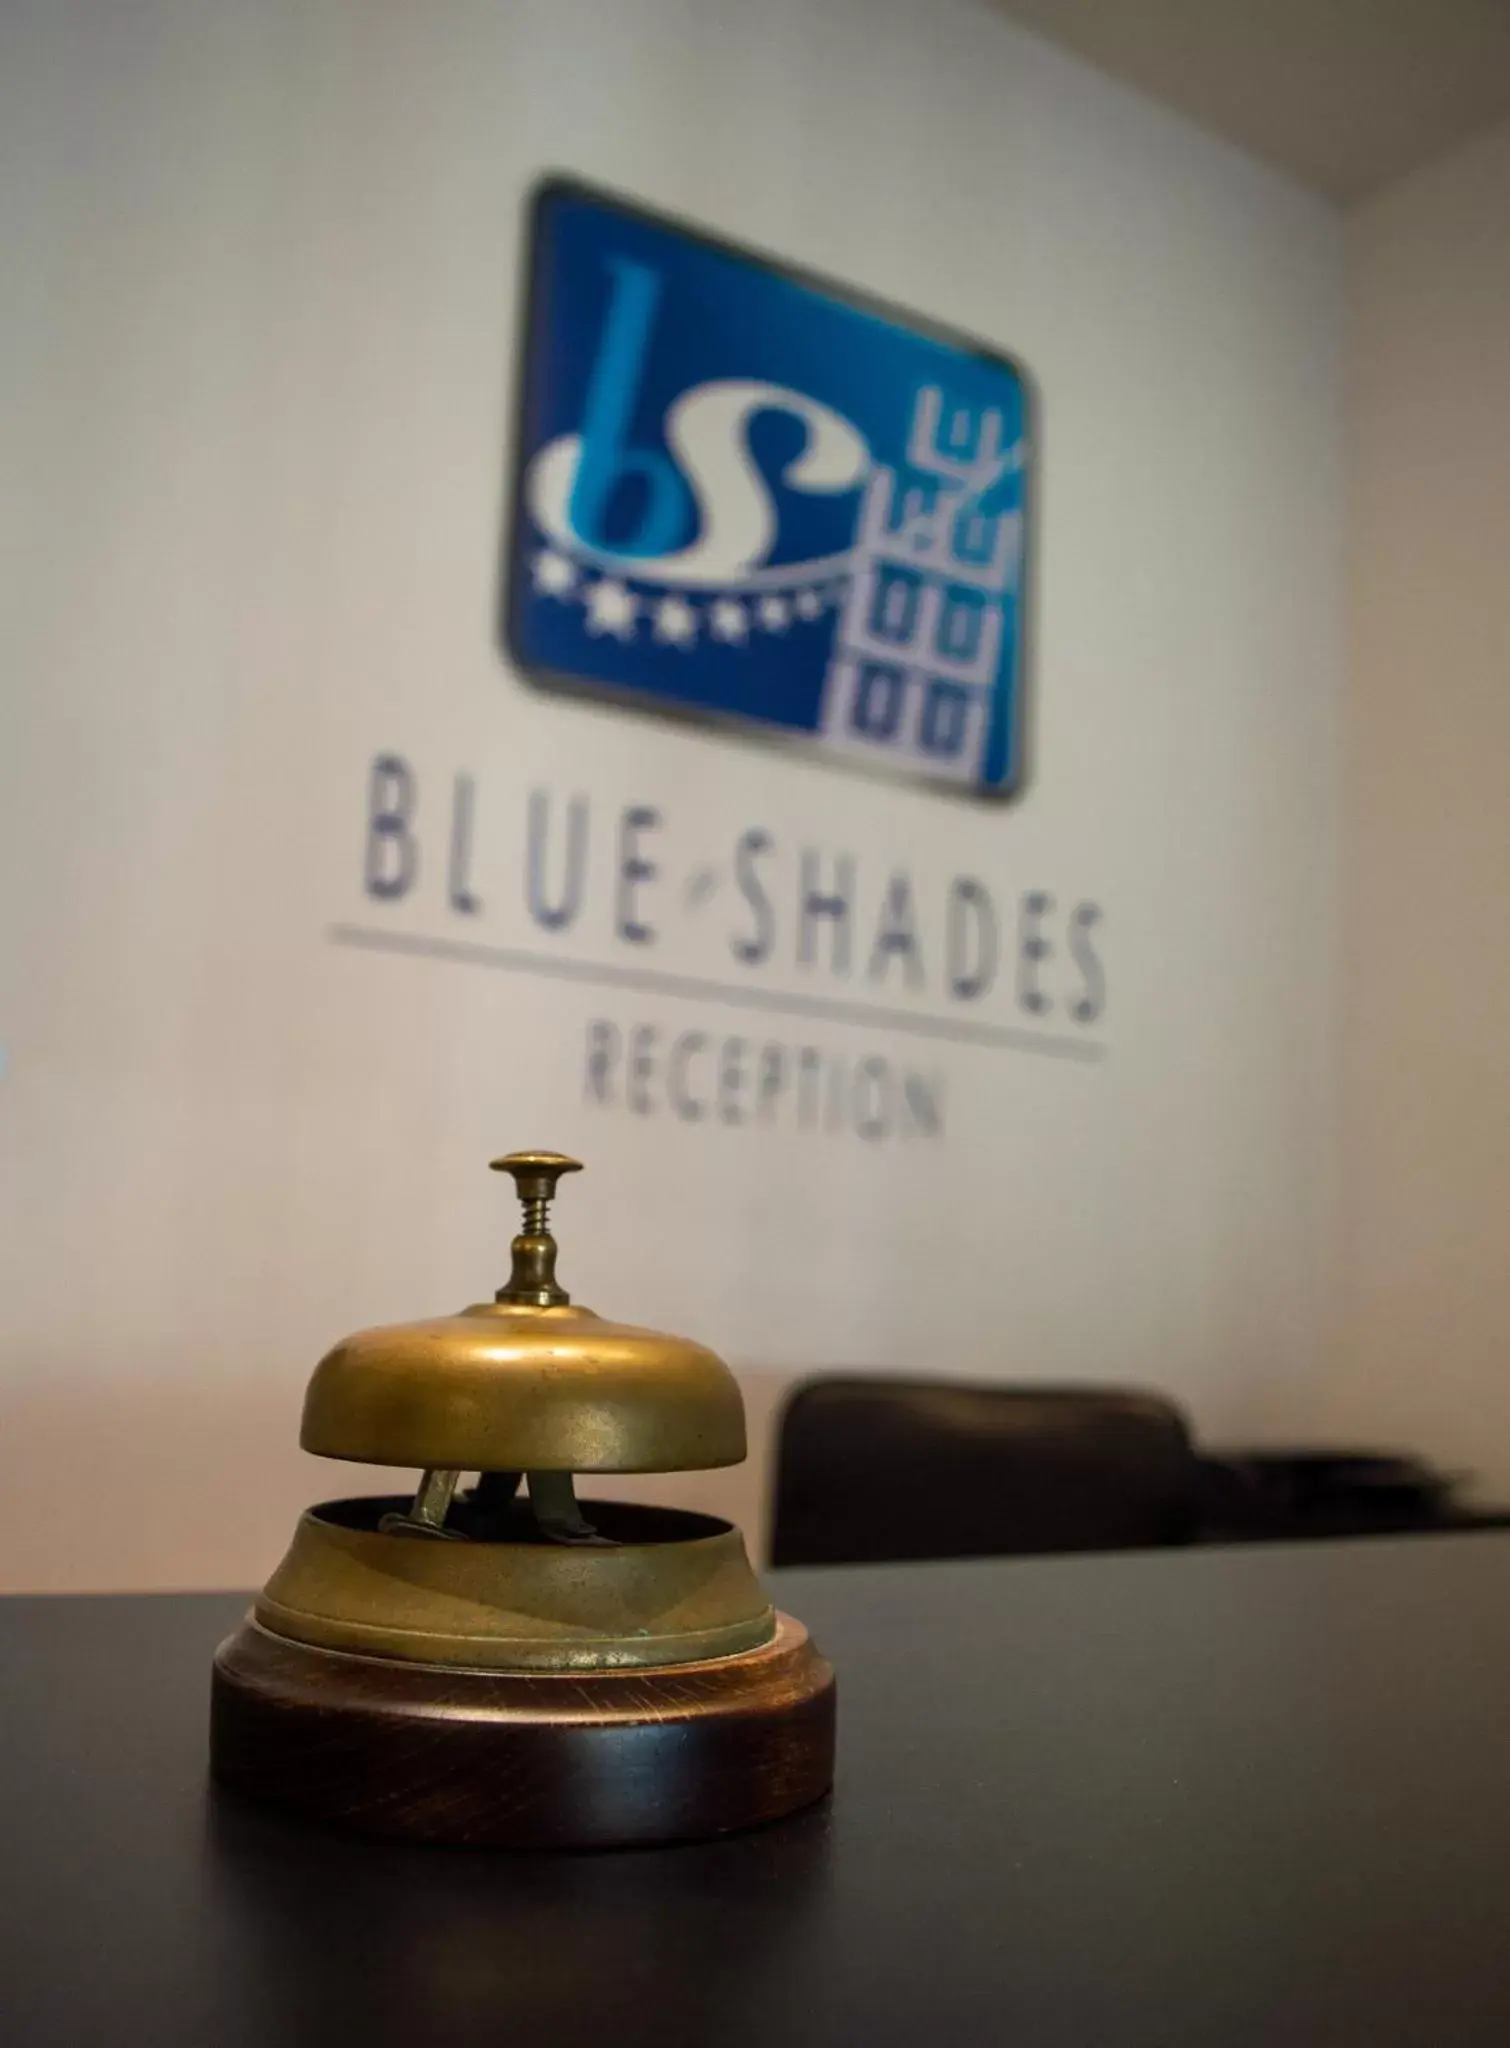 Logo/Certificate/Sign in Blue Shades ApartHotel